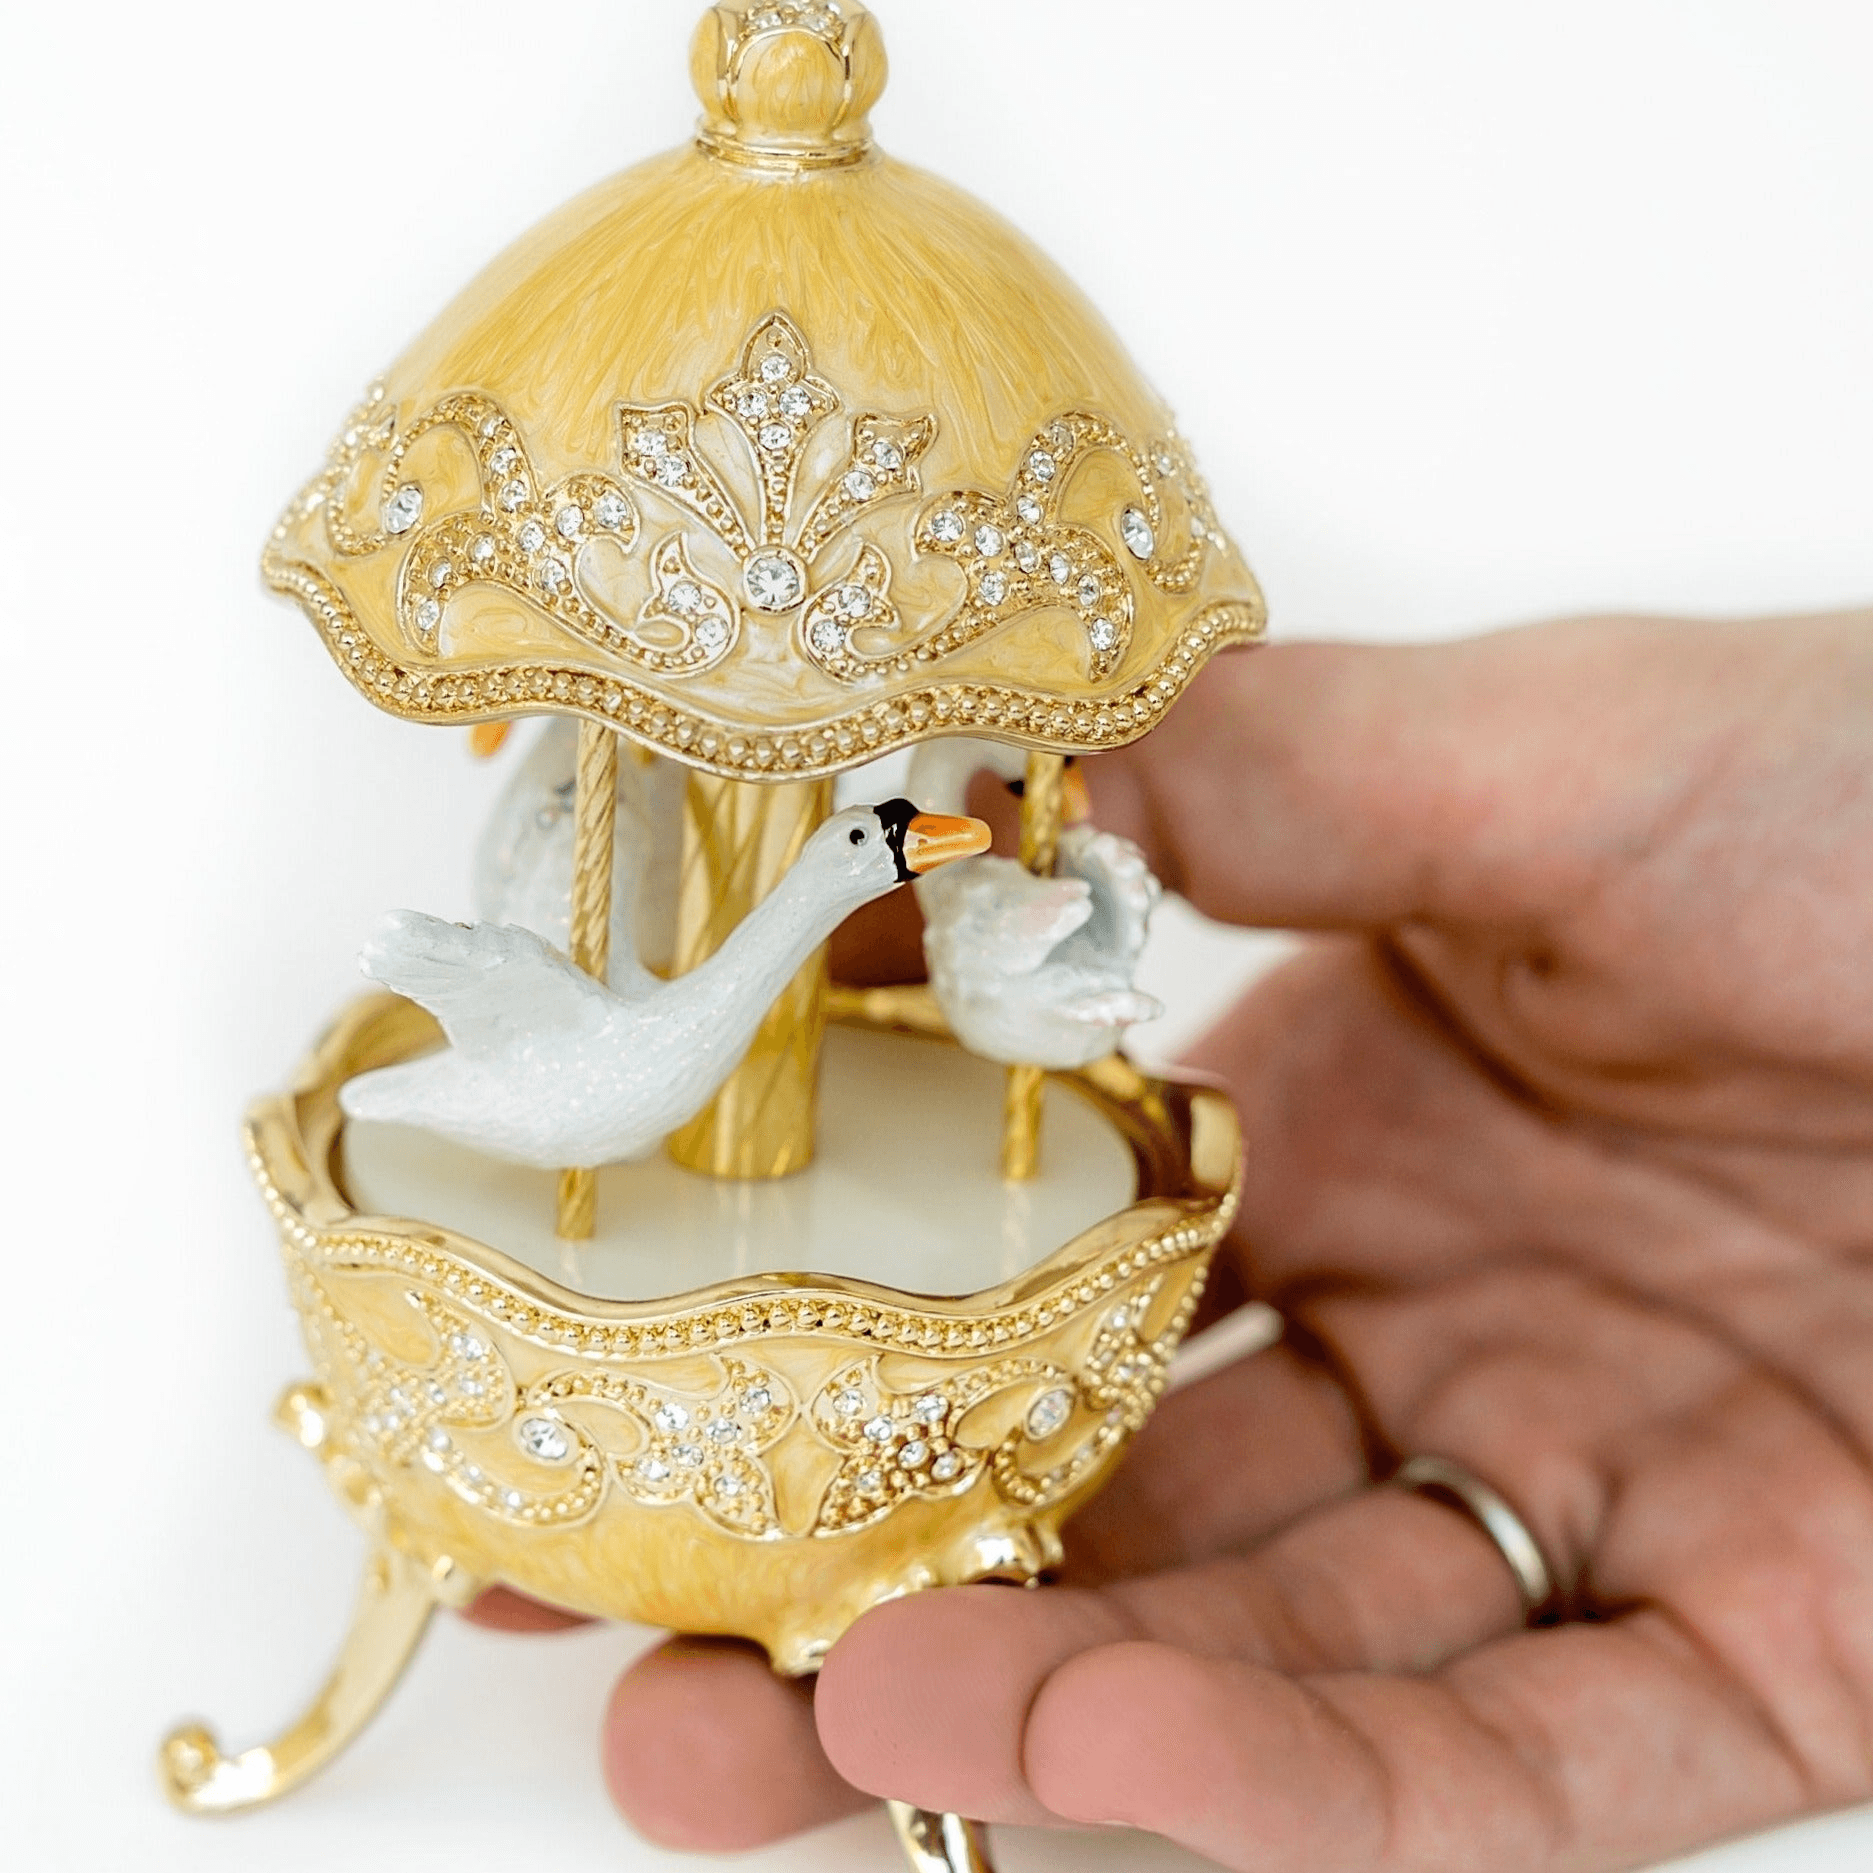 Yellow Carousel Egg with White Swans  